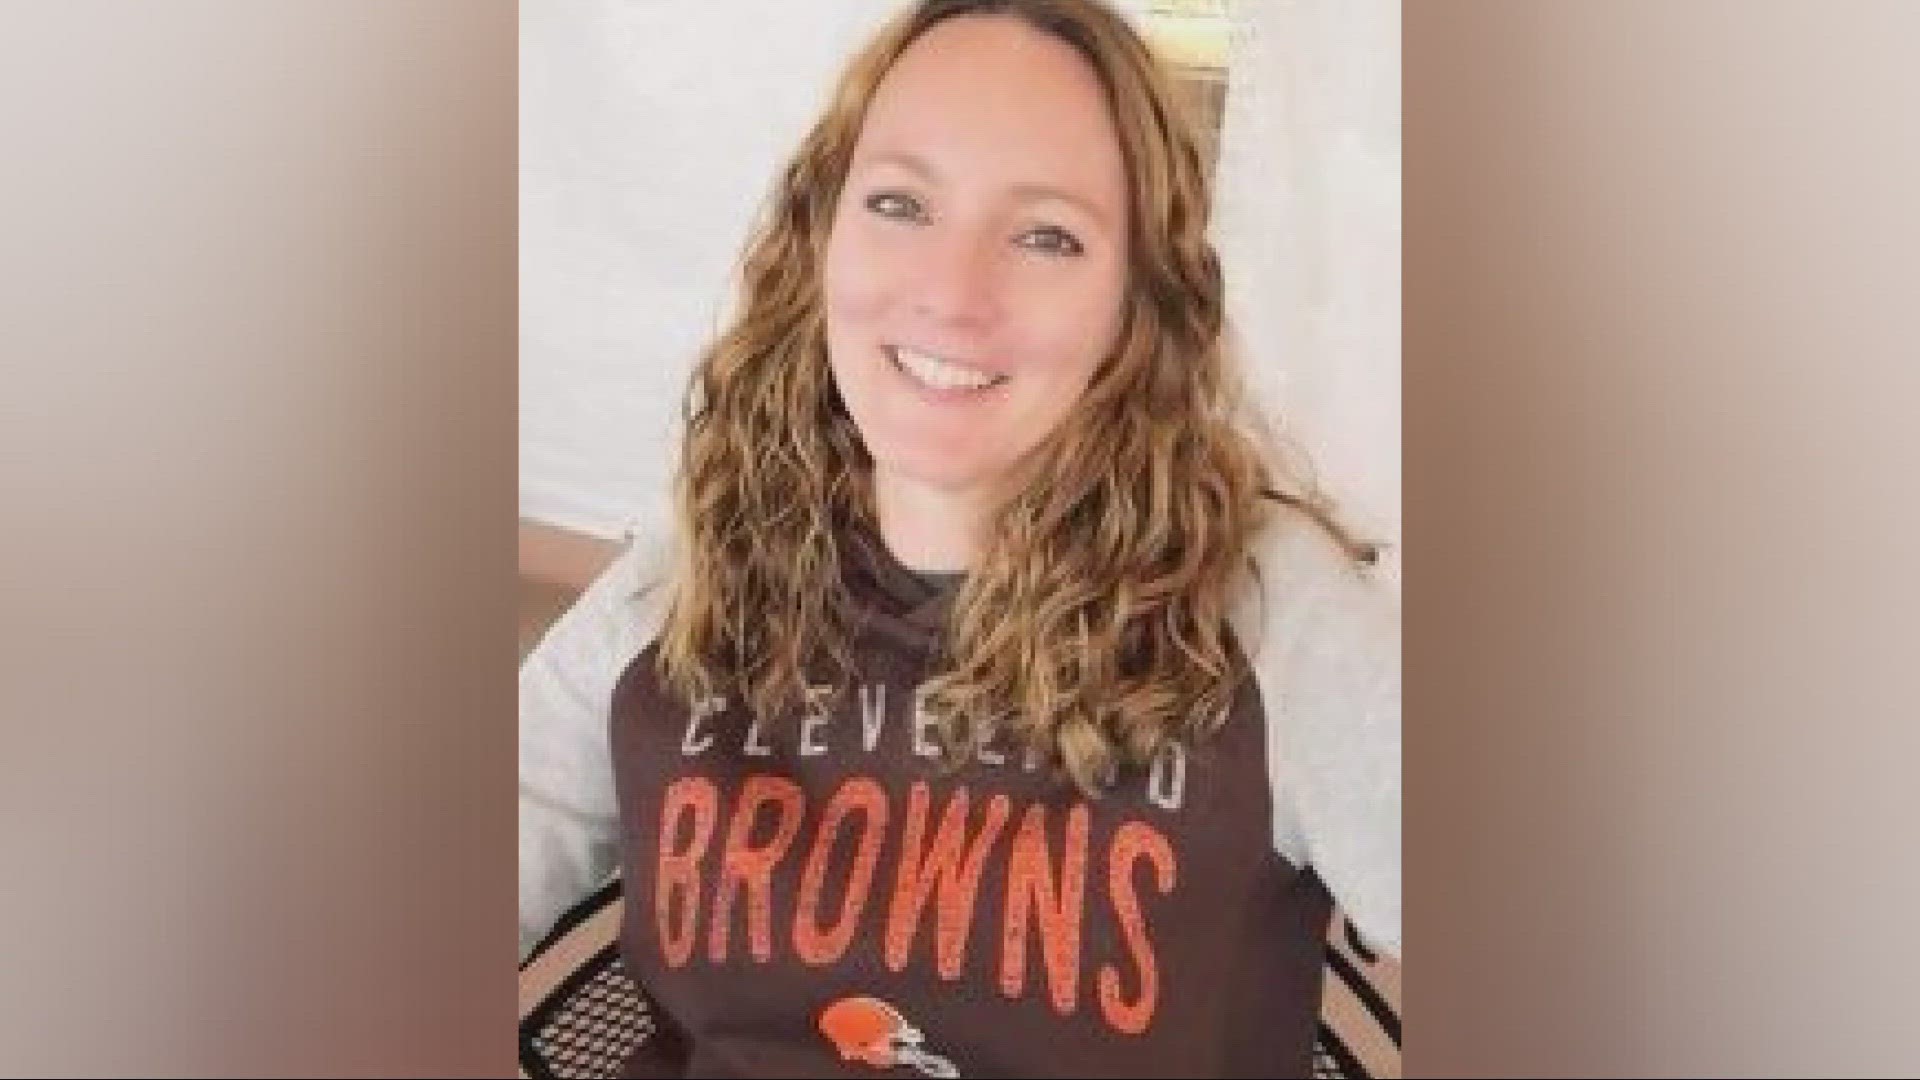 A visitation will be taking place at Kindrich-Mchugh Steinbauer Funeral Home in Solon on Wednesday, May 3, from 3-7 p.m. for Crystal Cespedes.